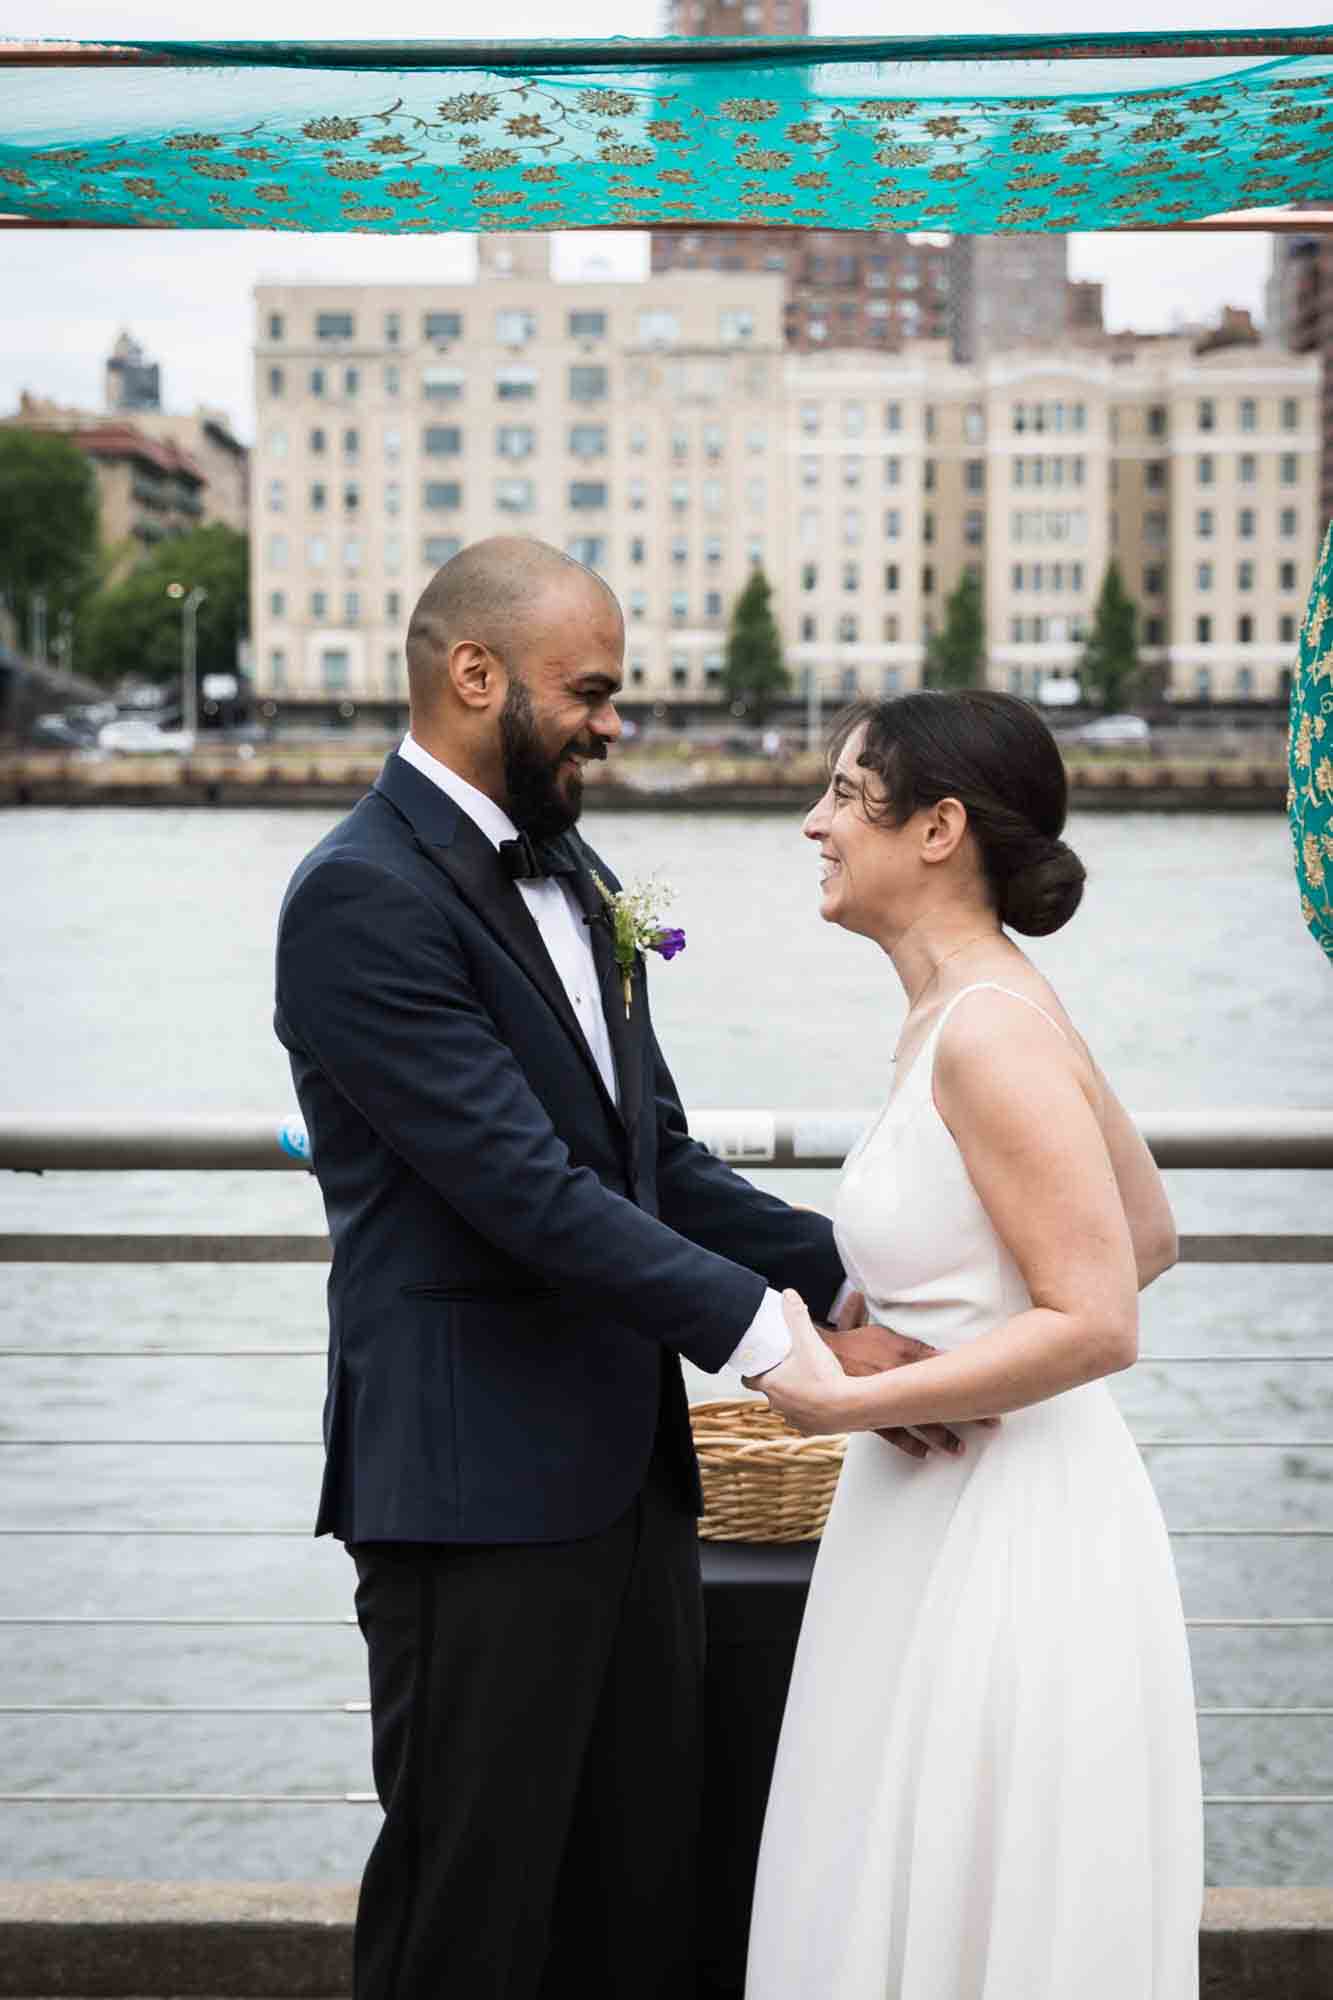 Bride and groom holding hands and laughing after outdoors ceremony at a Sanctuary Roosevelt Island wedding